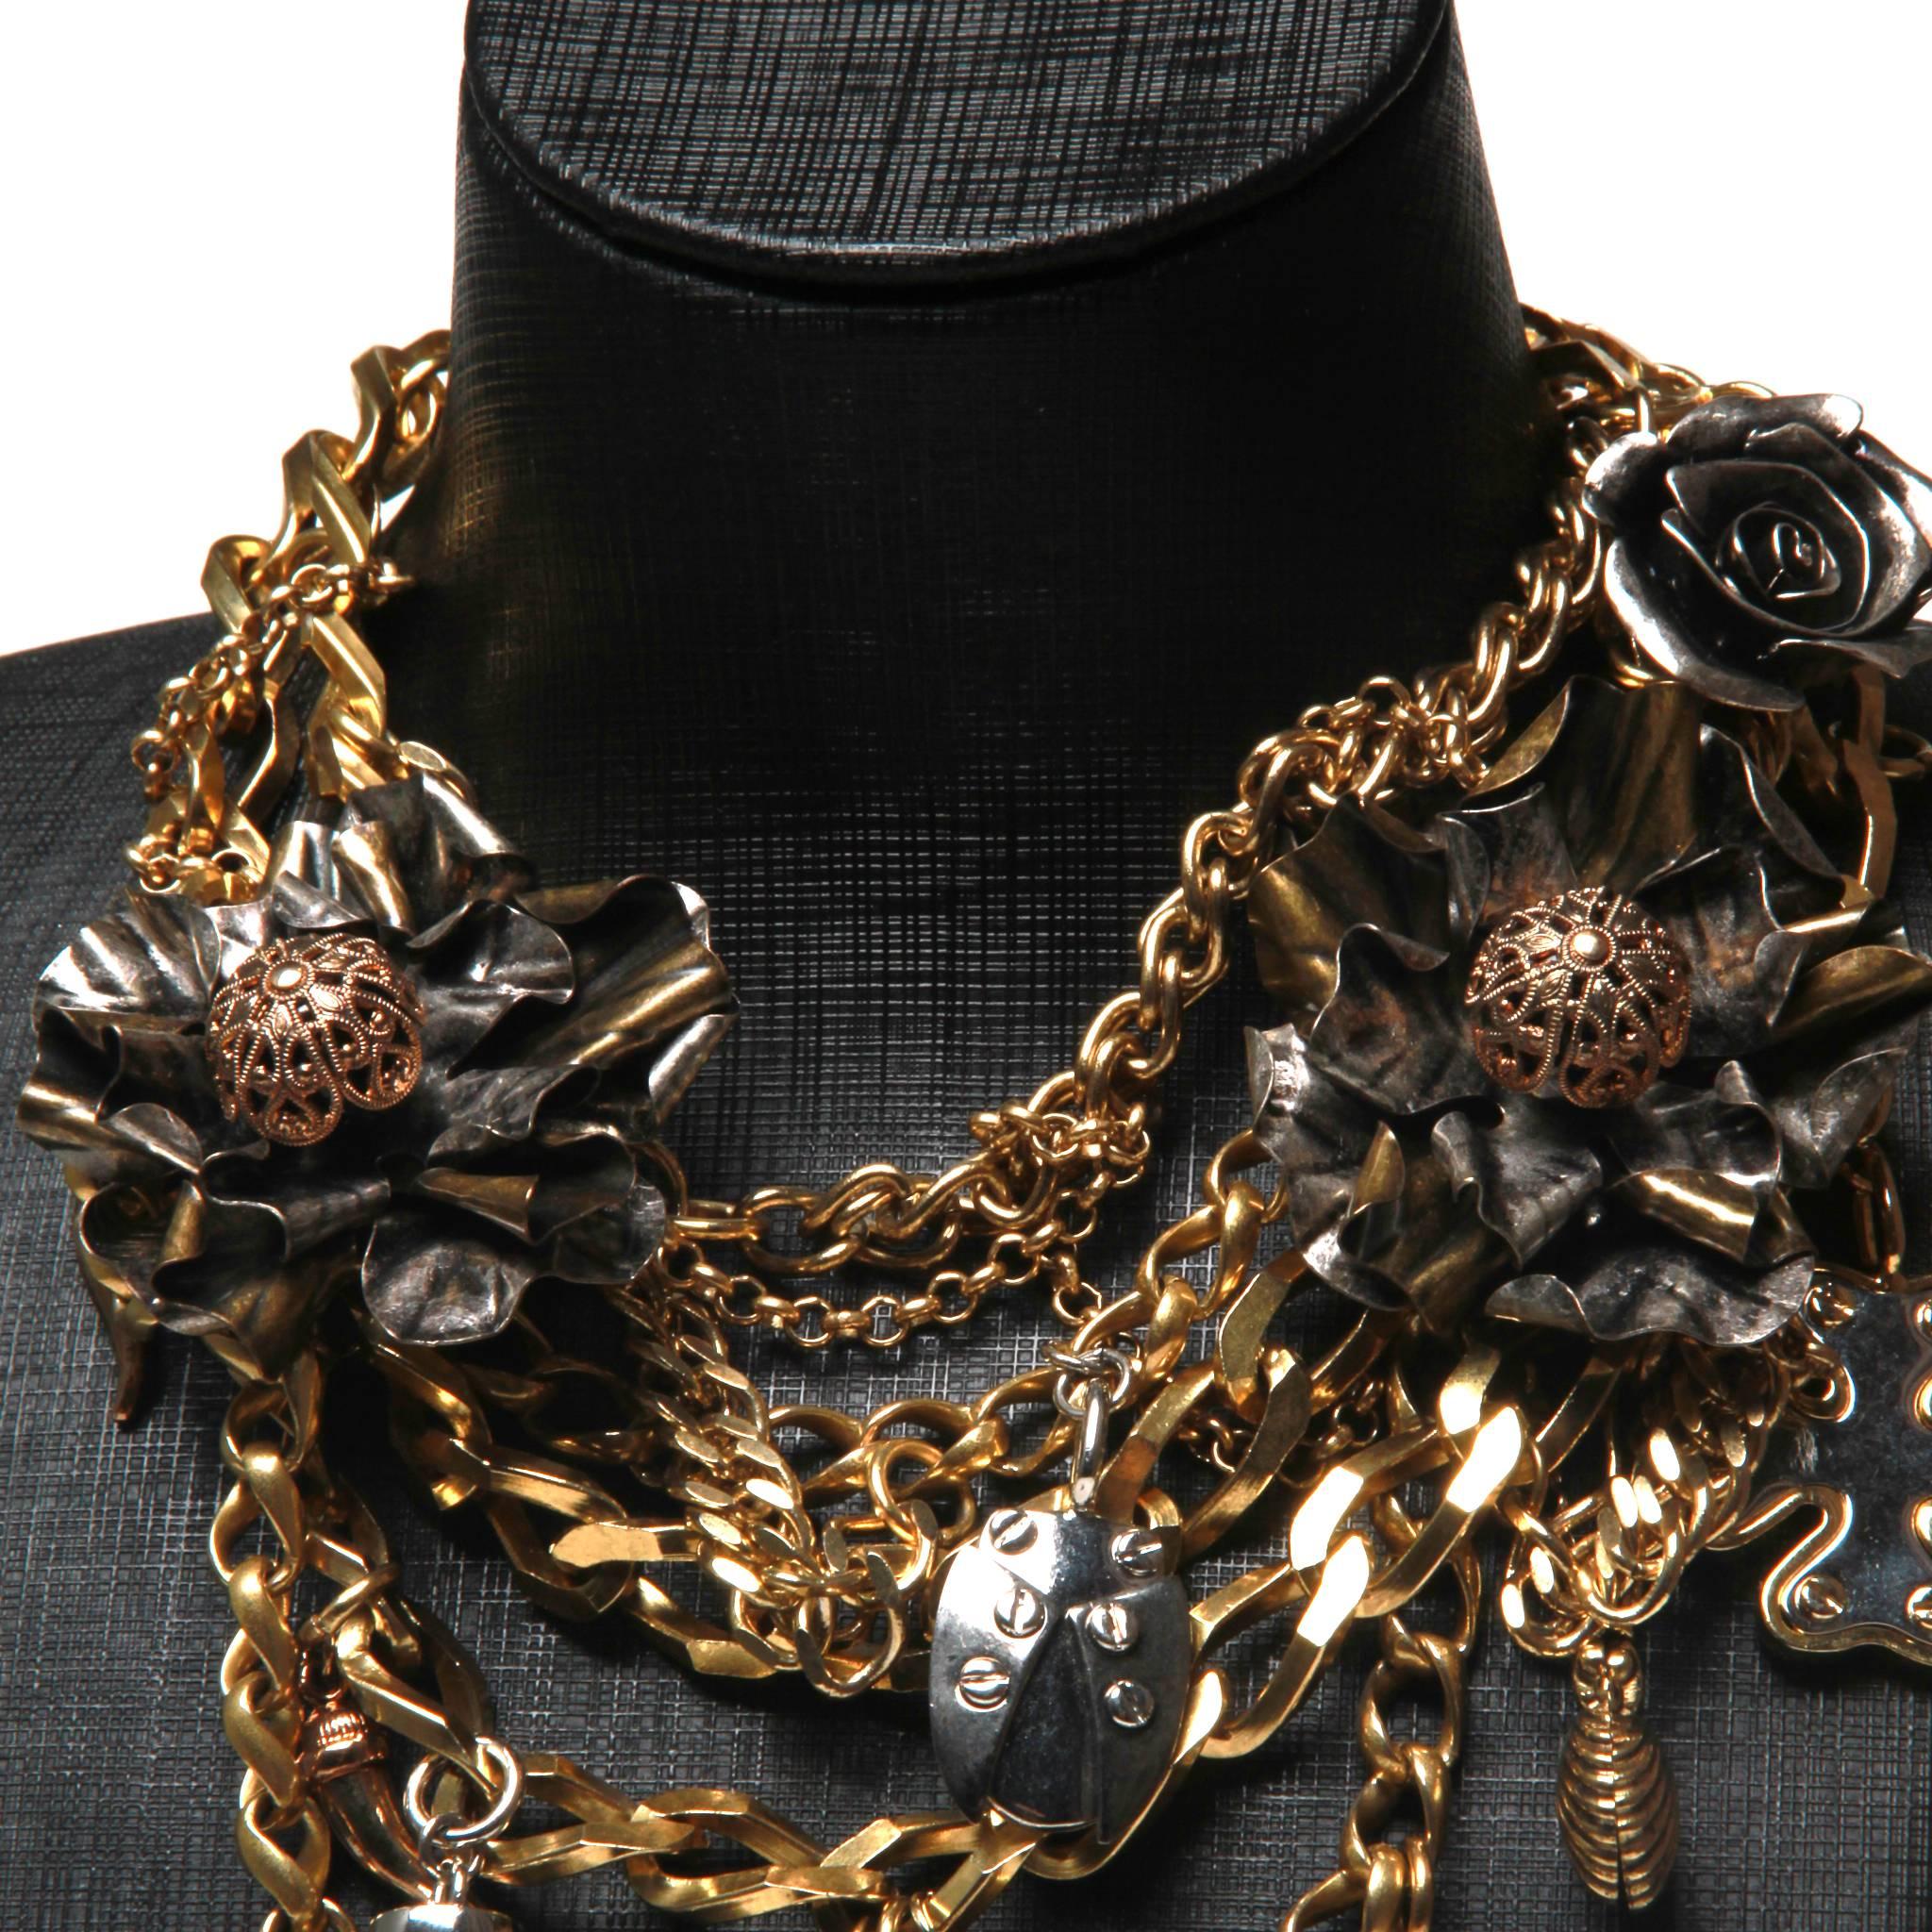 Straight off the runway, this Dolce & Gabbana  necklace is an amazing statement piece.  It sits high on the neckline and high quality charms include lockets, religious medallions, coin replicas, lucky horseshoe & padlock.
Tag shows US$2395